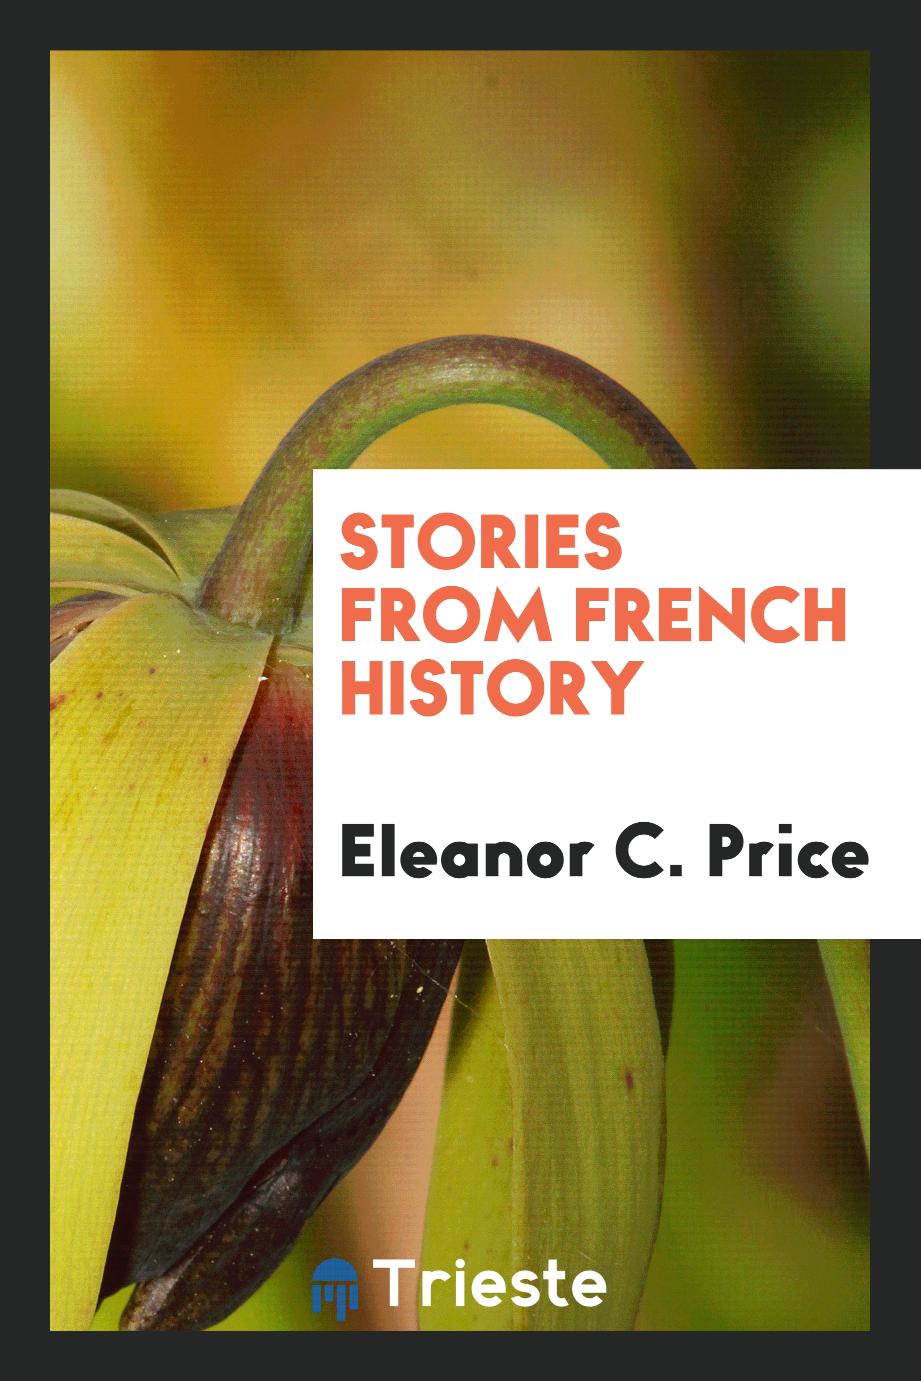 Stories from French history